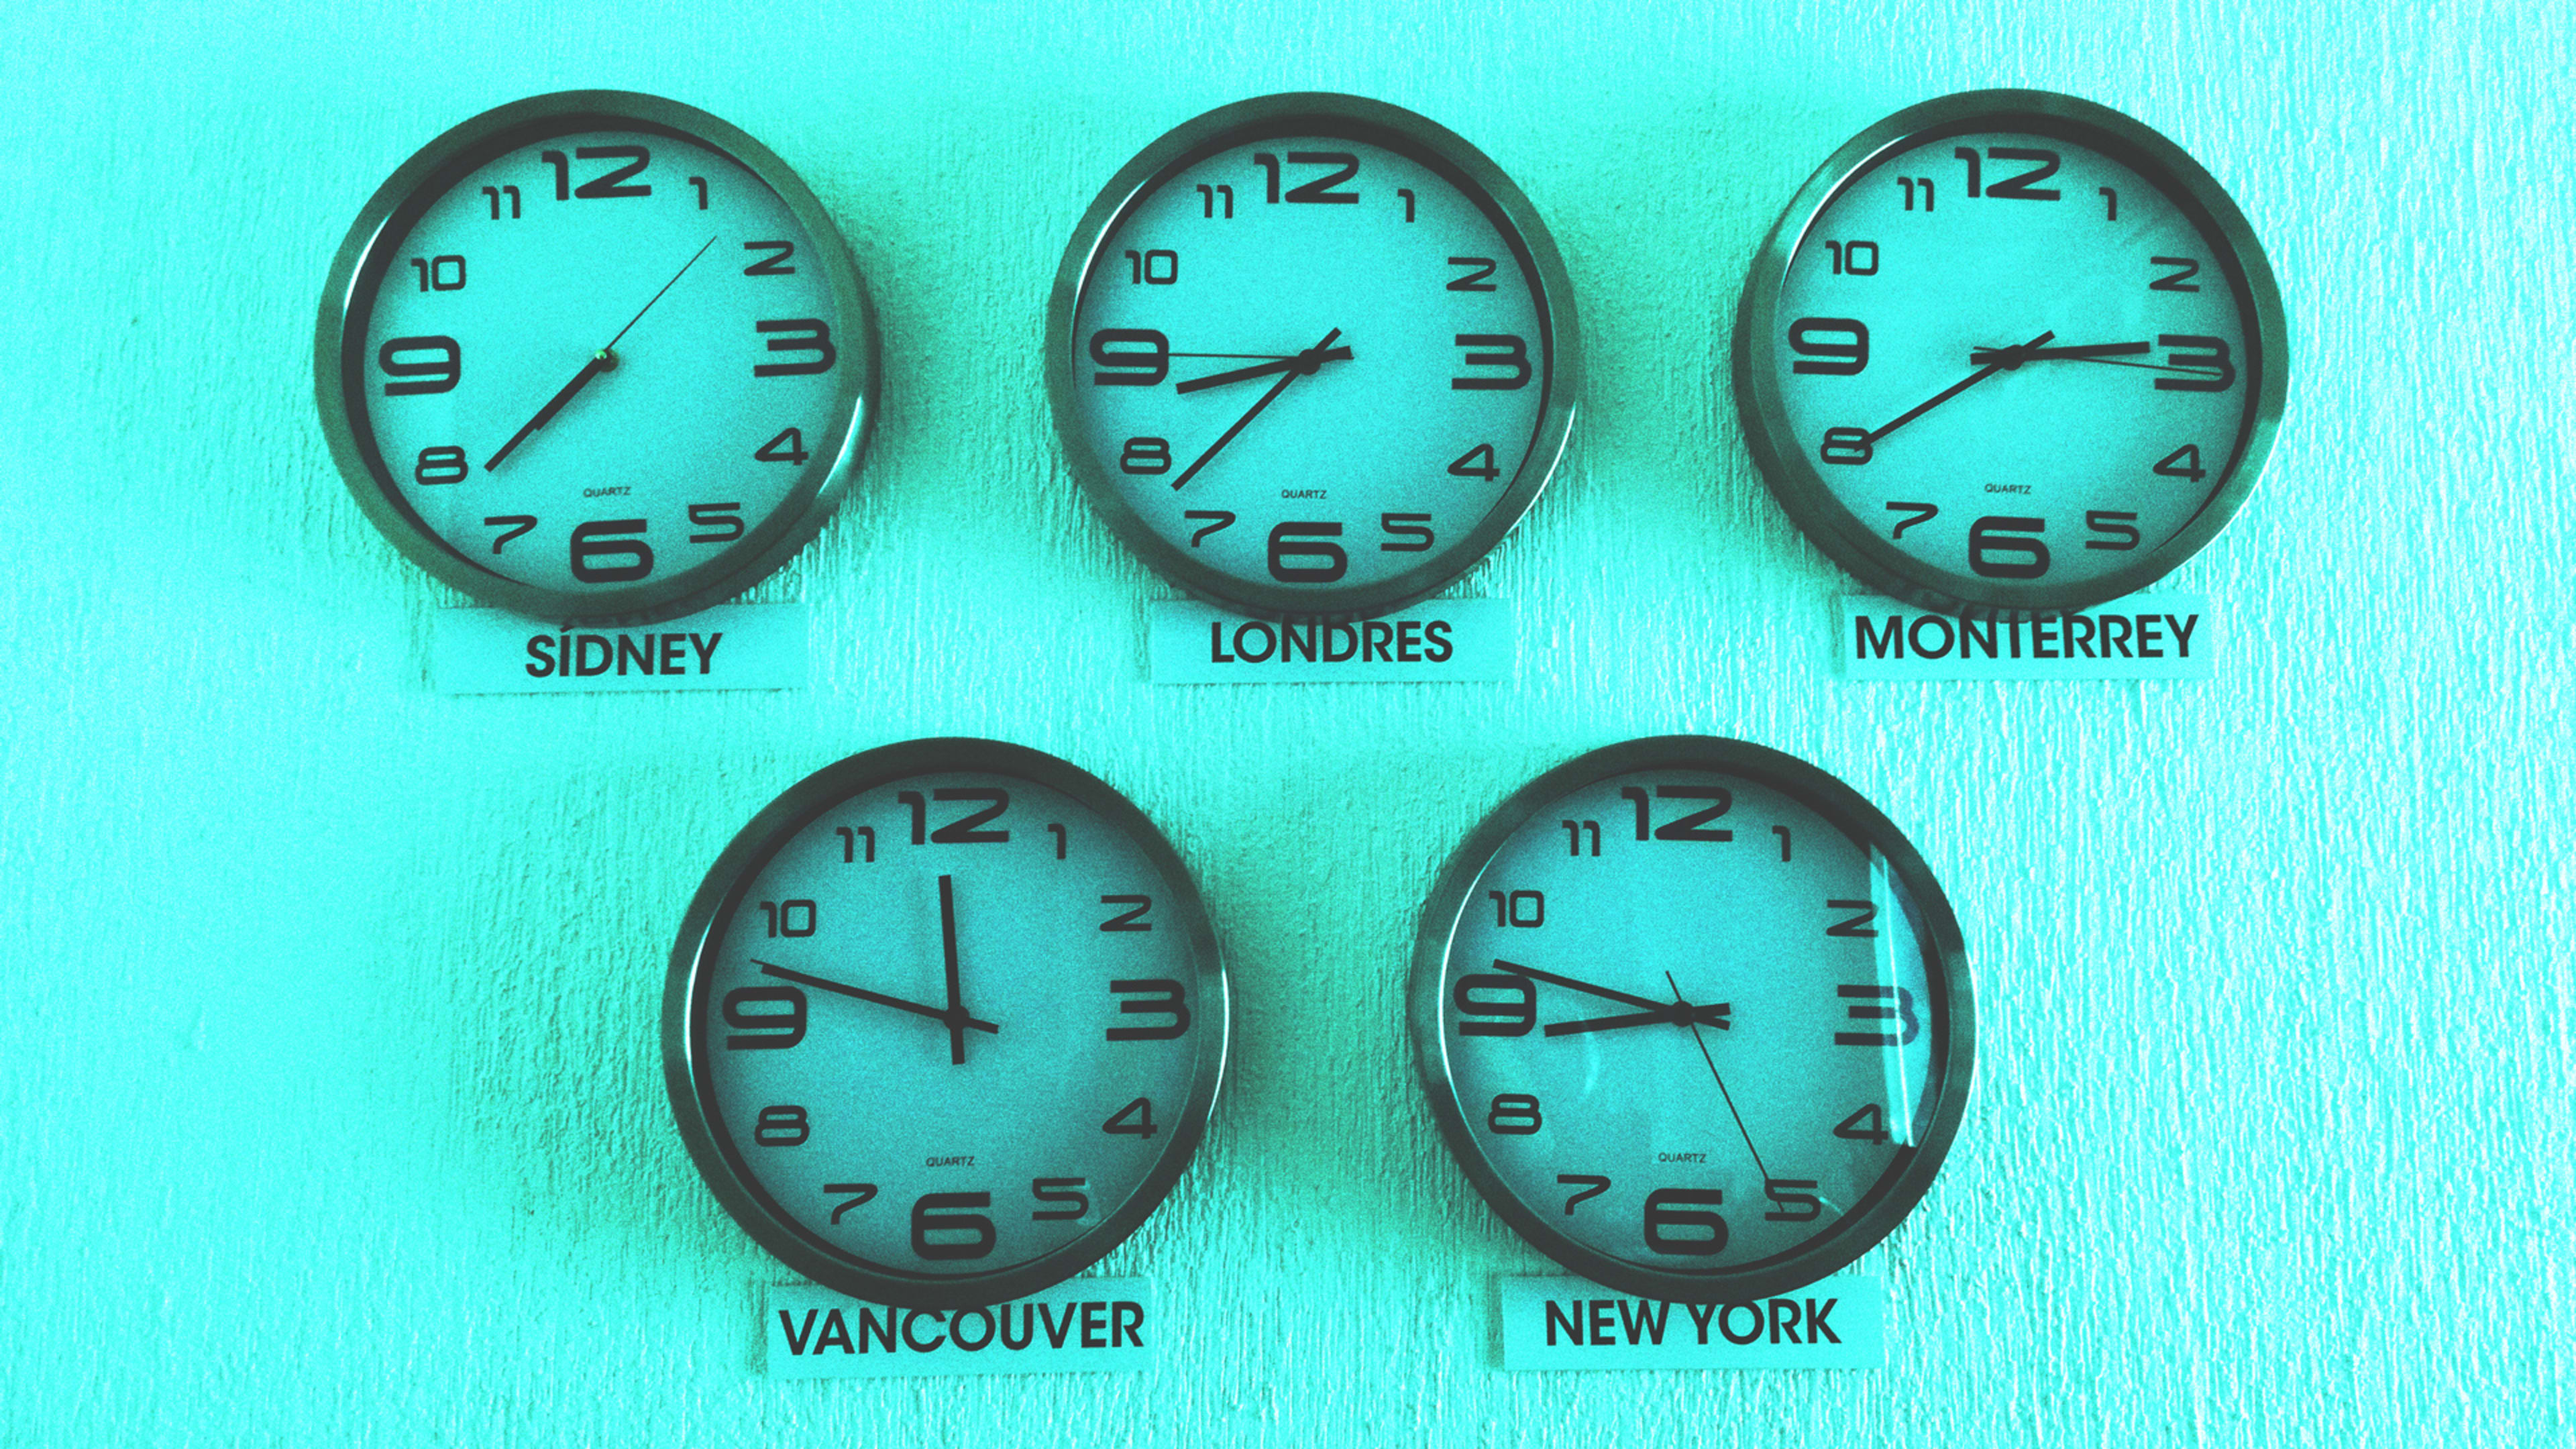 How to be productive when everyone you work with is in a different time zone